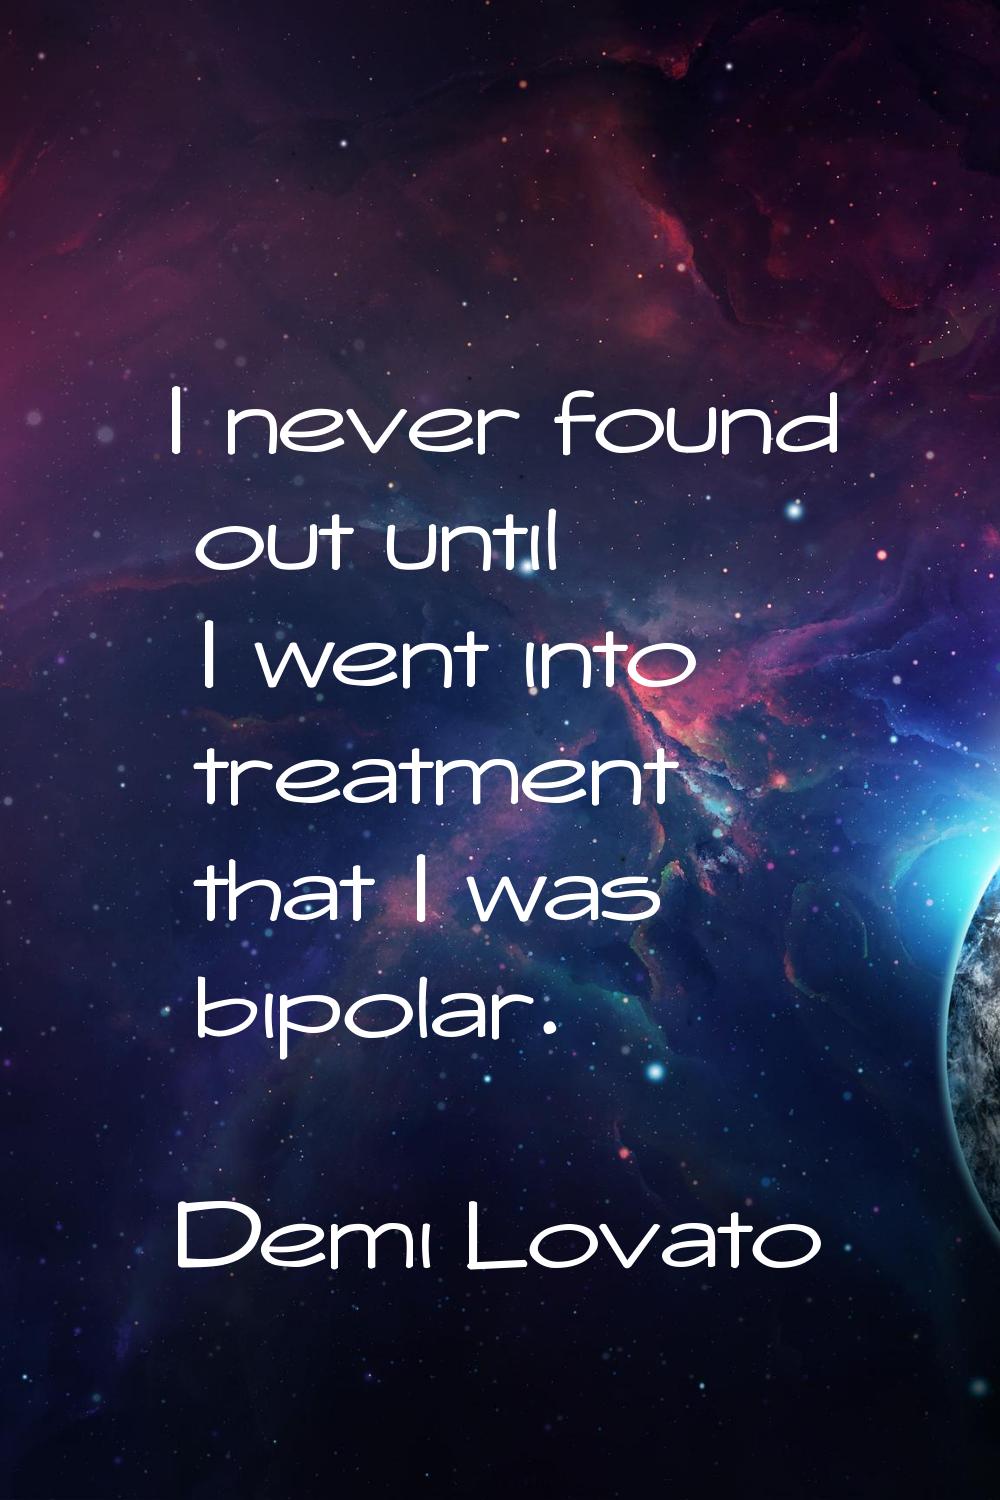 I never found out until I went into treatment that I was bipolar.